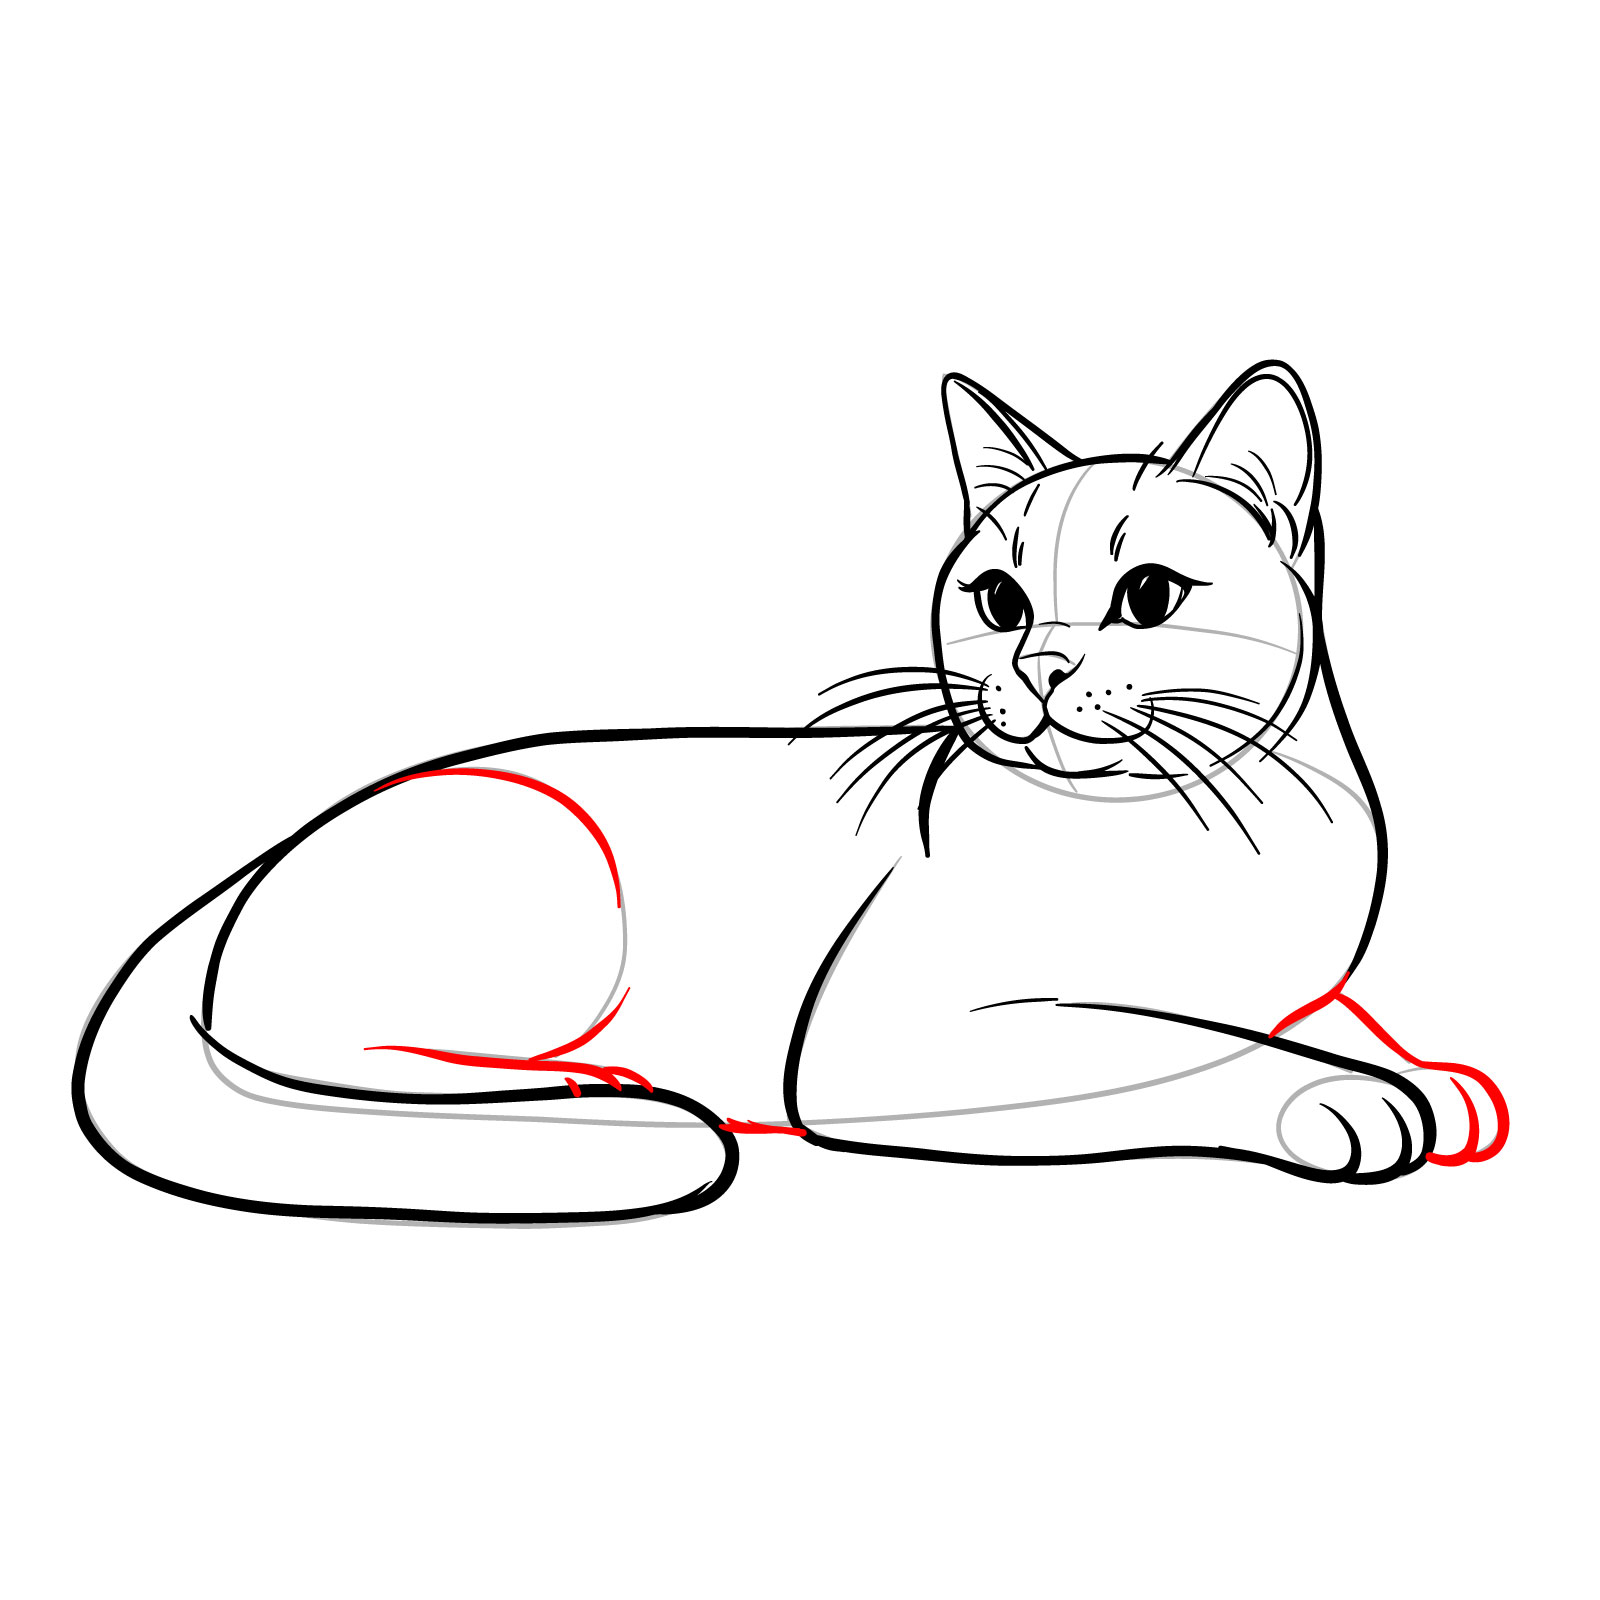 Sketch depicting the addition of the hind legs and the lower body of a cat in a lying side view pose - step 13